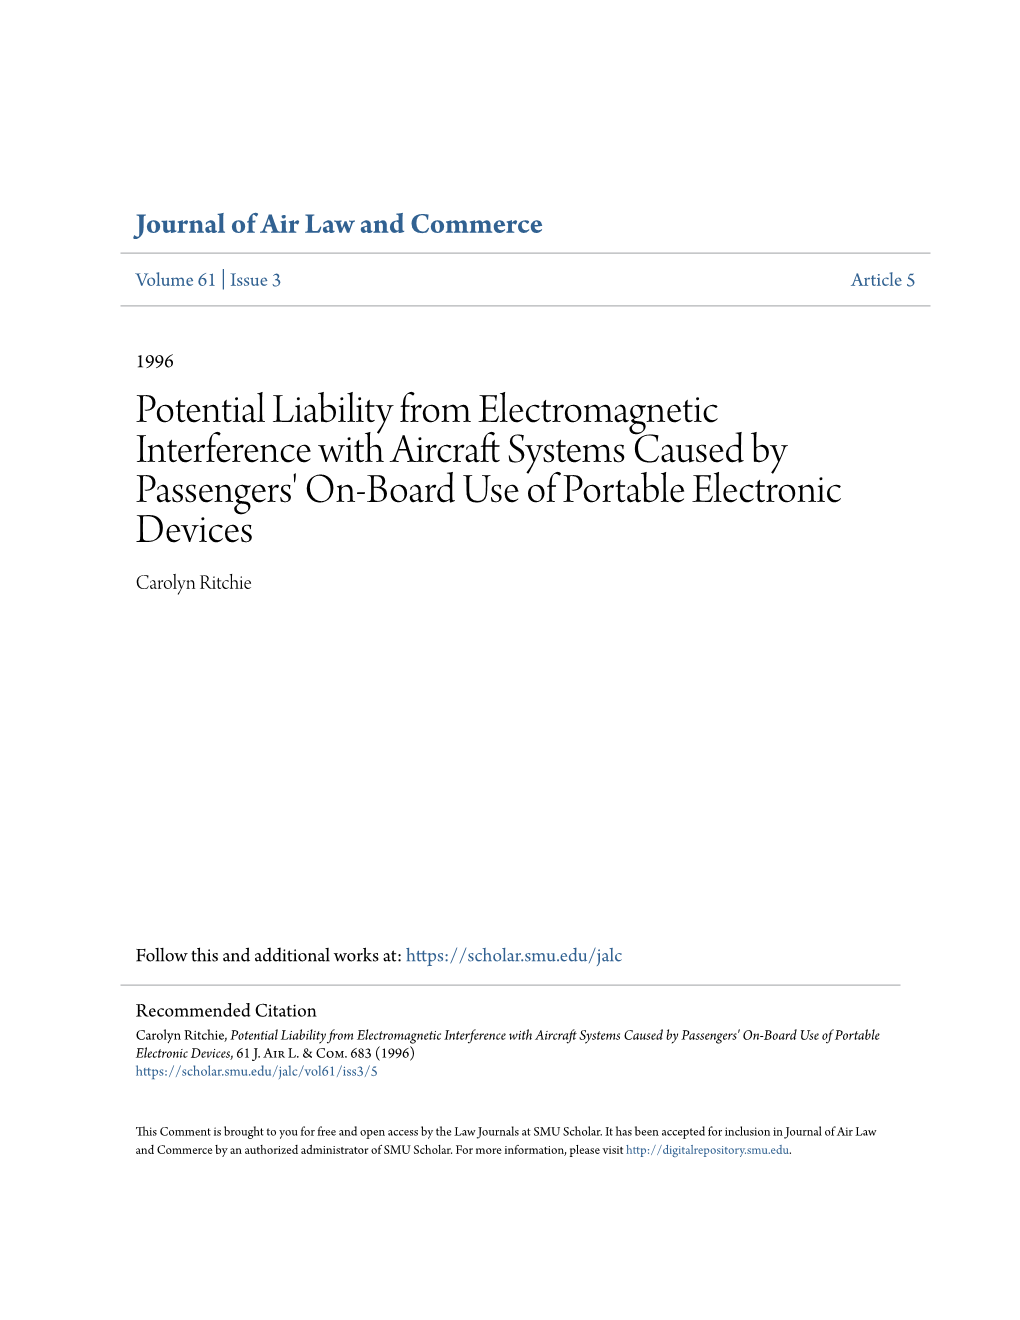 Potential Liability from Electromagnetic Interference with Aircraft Yss Tems Caused by Passengers' On-Board Use of Portable Electronic Devices Carolyn Ritchie